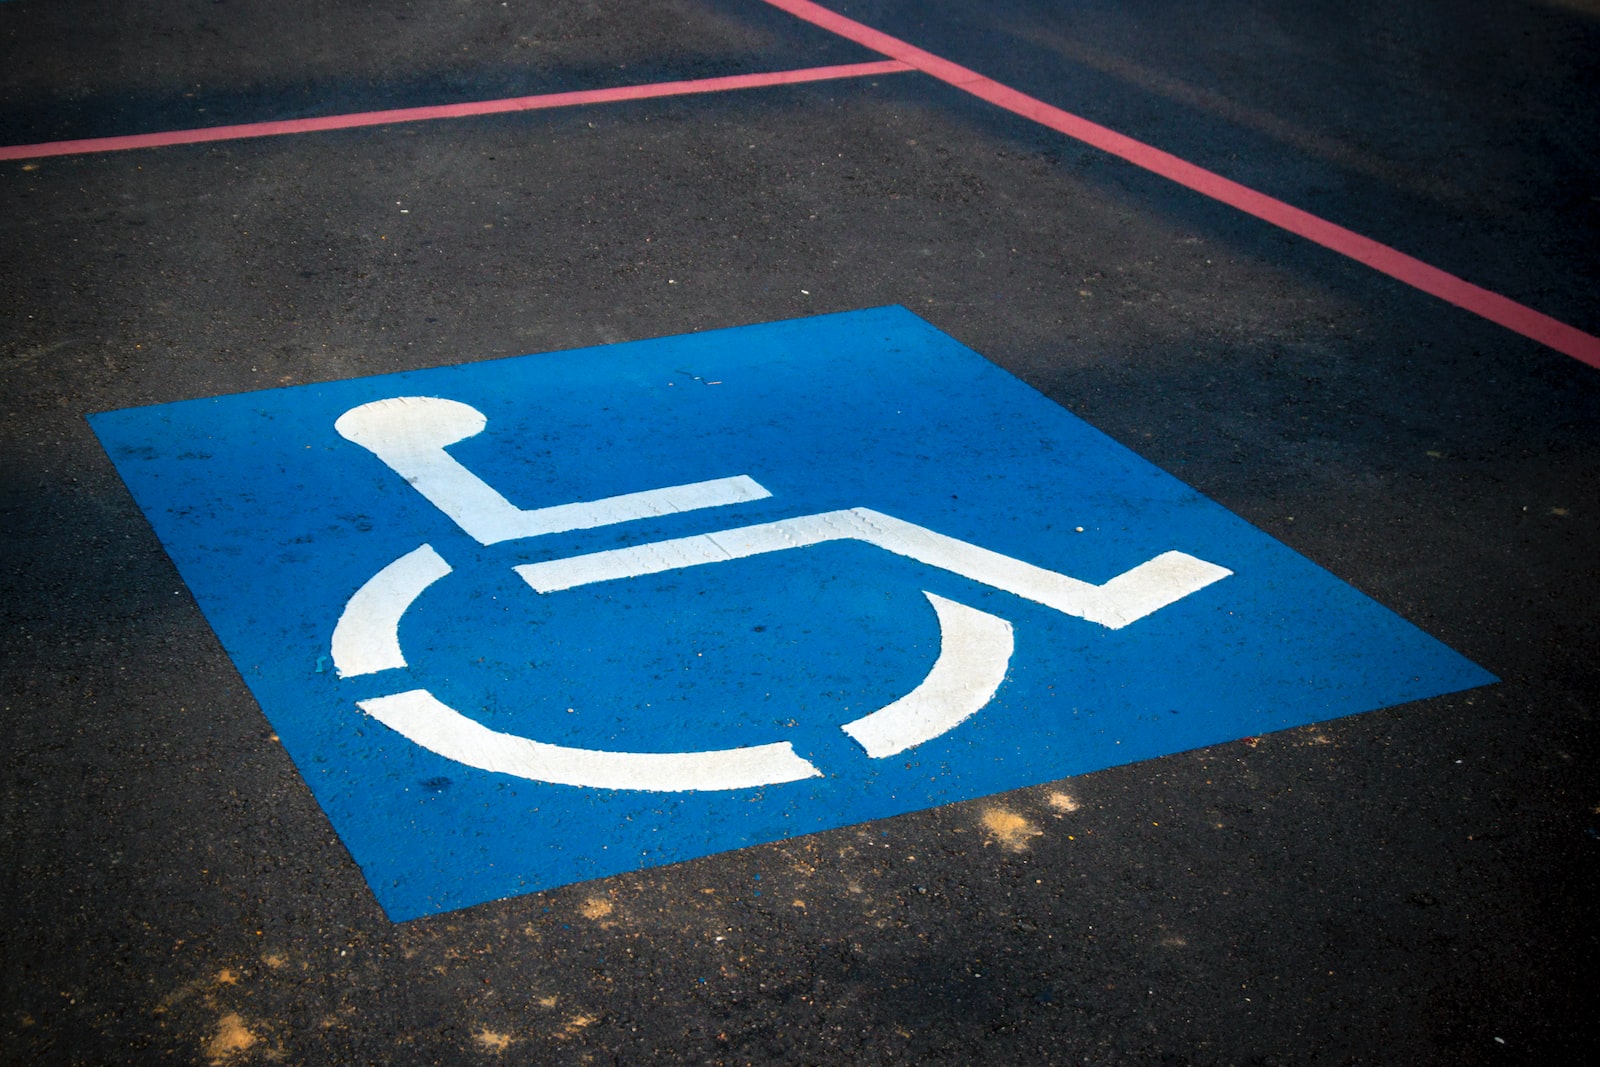 New guidance on public EV charging accessibility released